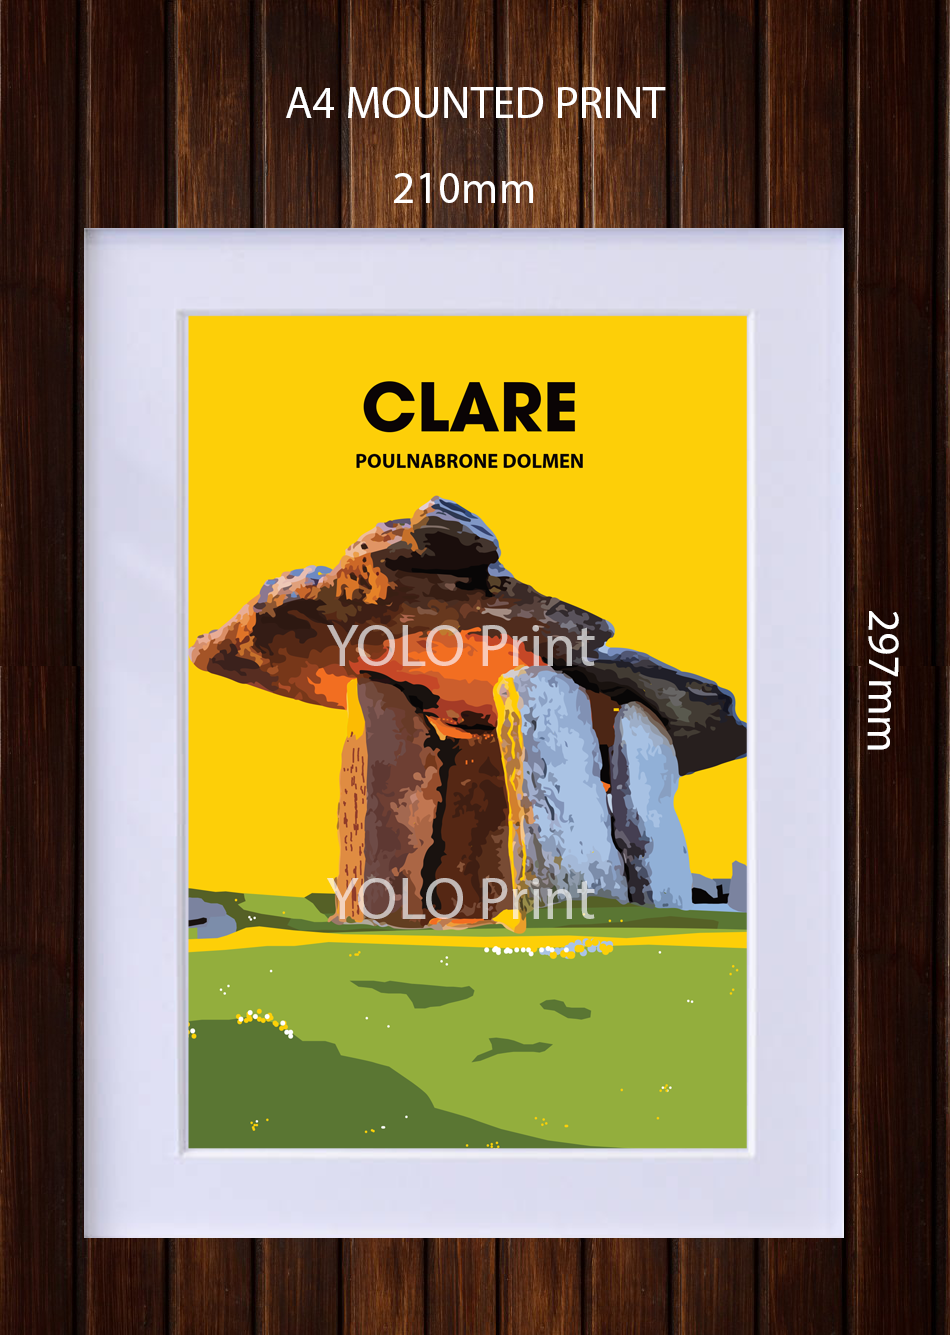 Clare Postcard or A4 Mounted Print or Fridge Magnet - POULNABRONE DOLMEN